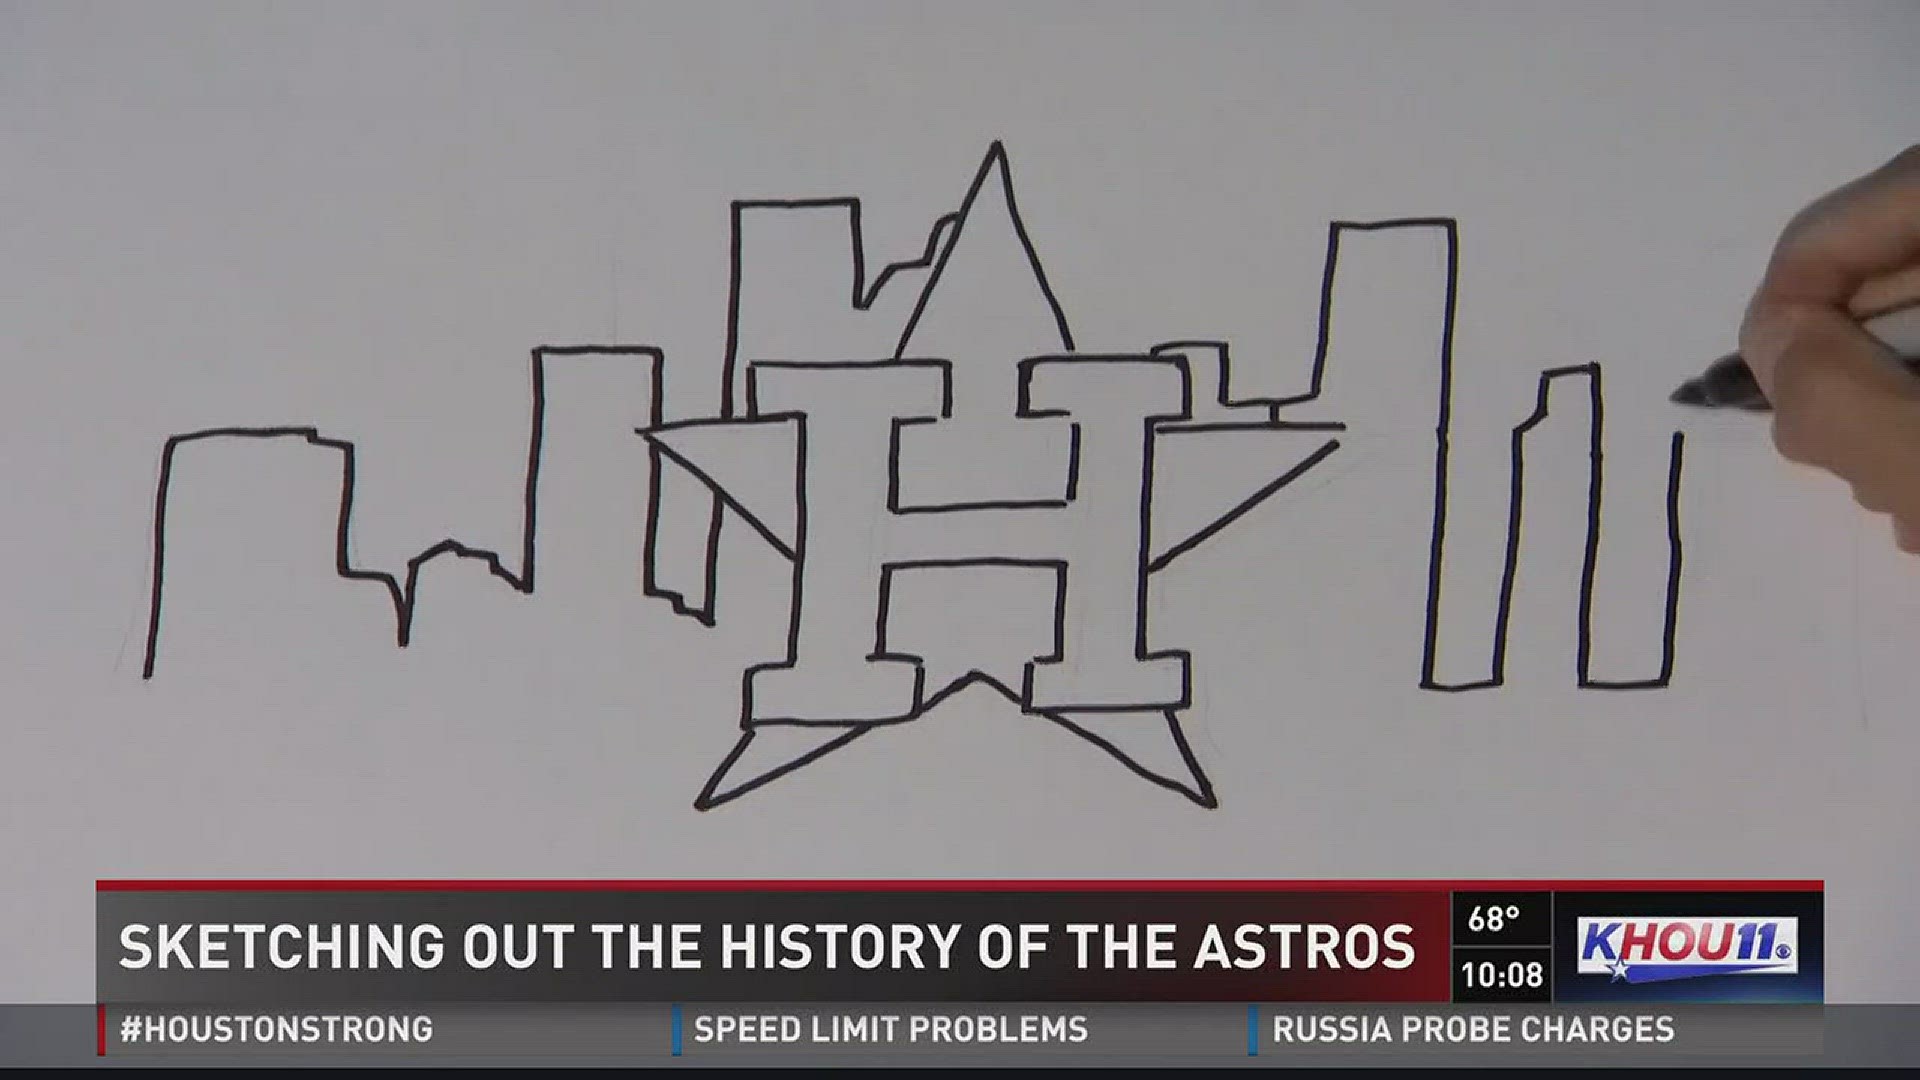 With all the excitement about the Astros in the world series, there are a lot more people becoming fans and interested in the team. Jeremy Jojola is sketches out the history of the franchise.